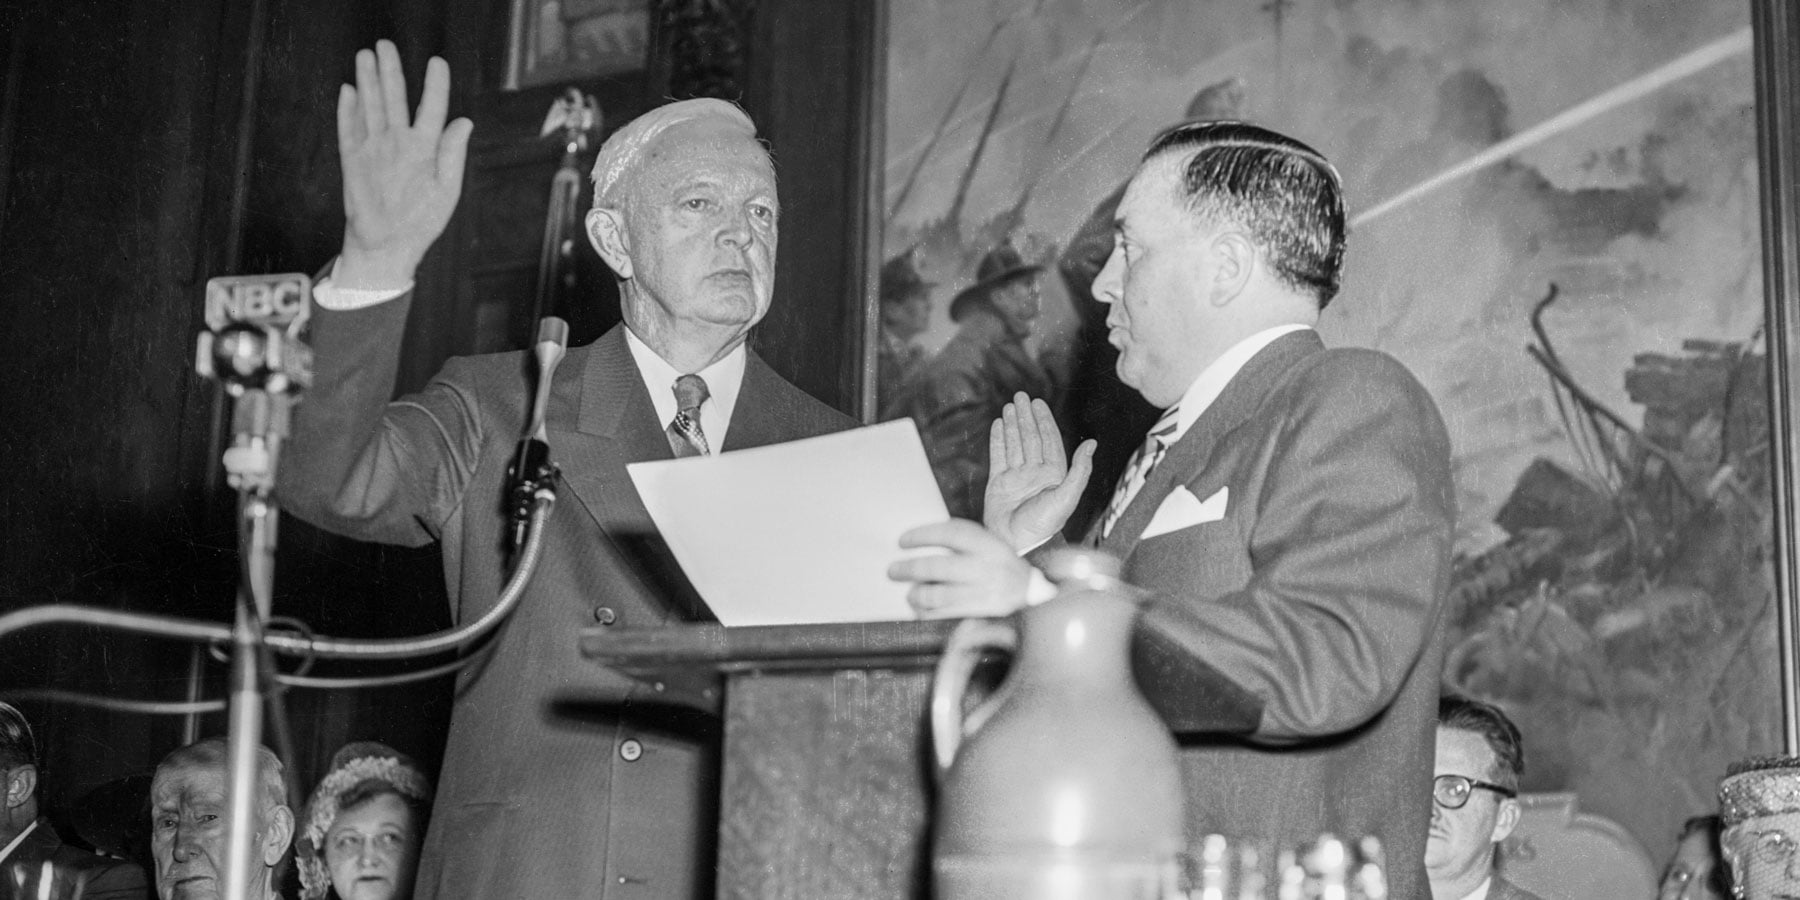 Martin Kennelly being sworn in by Richard J. Daley